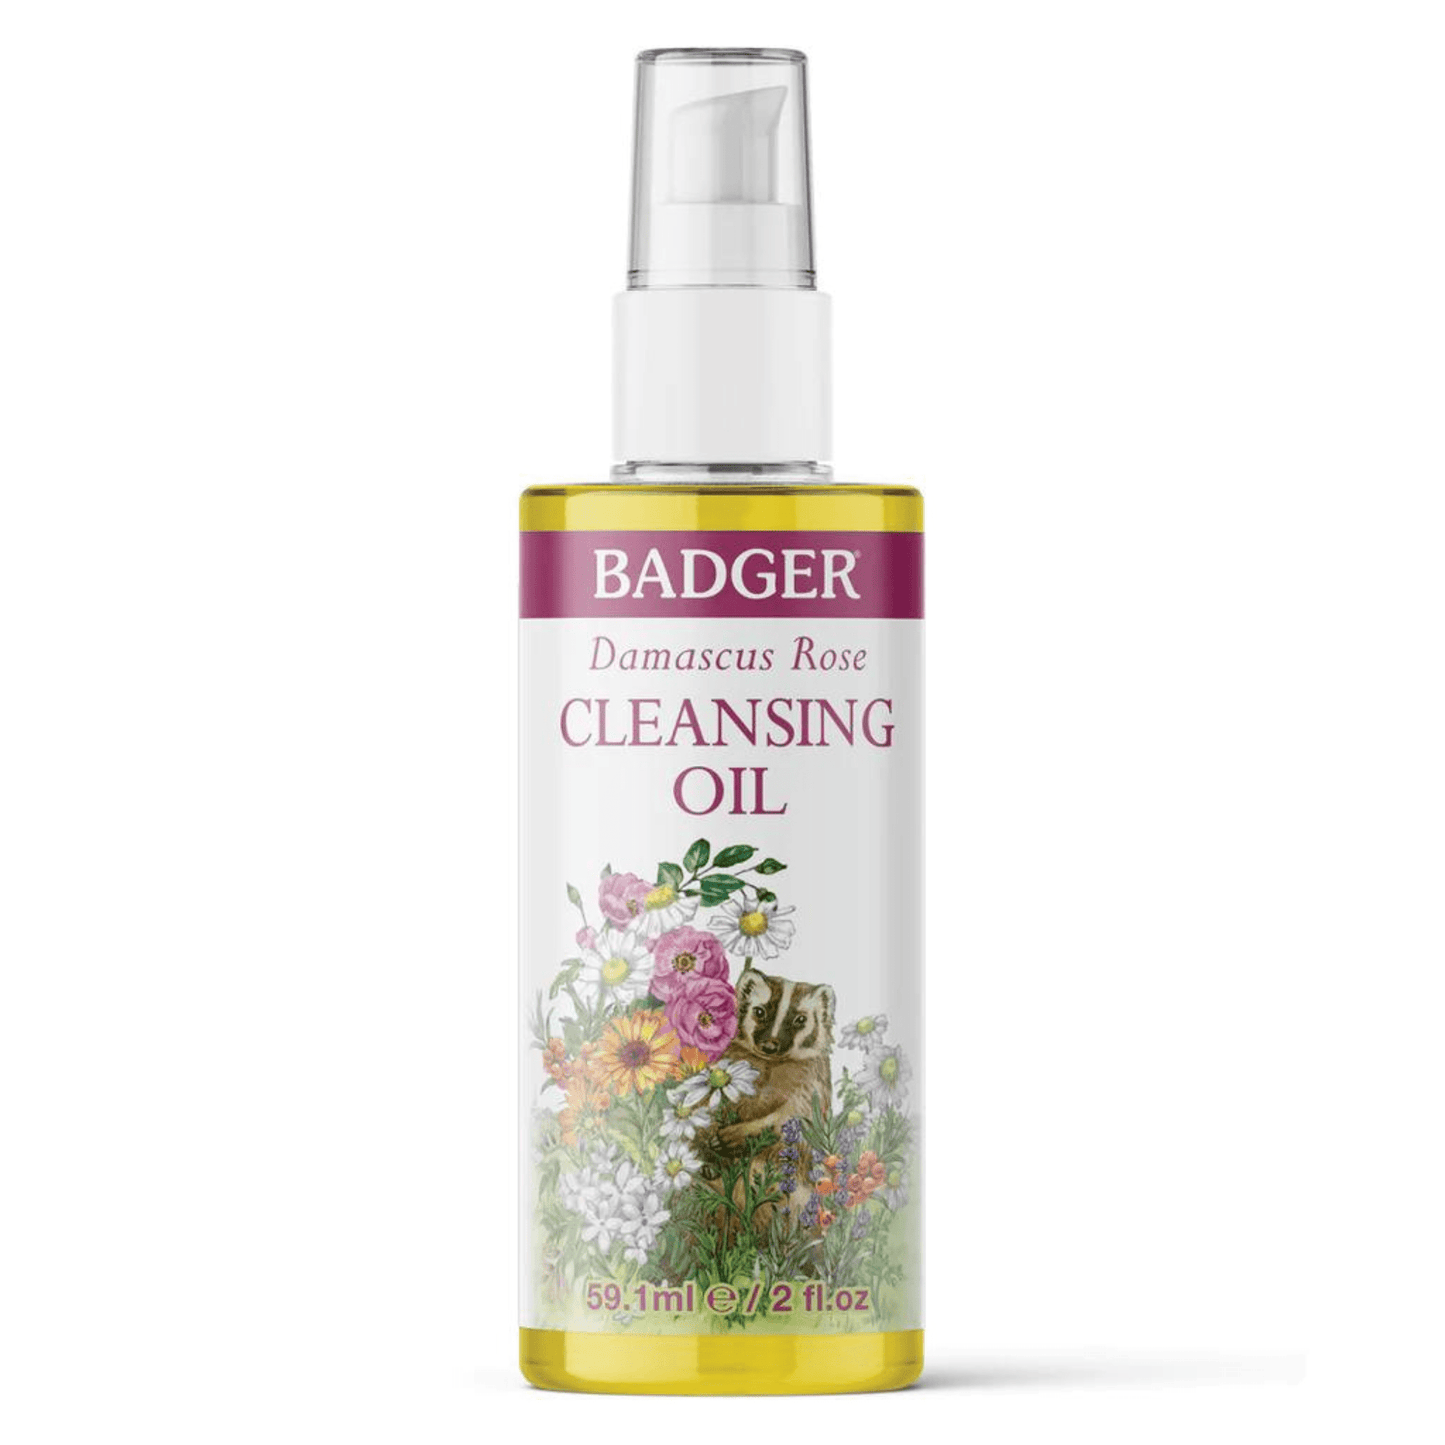 Primary Image of Damascus Rose Cleansing Oil